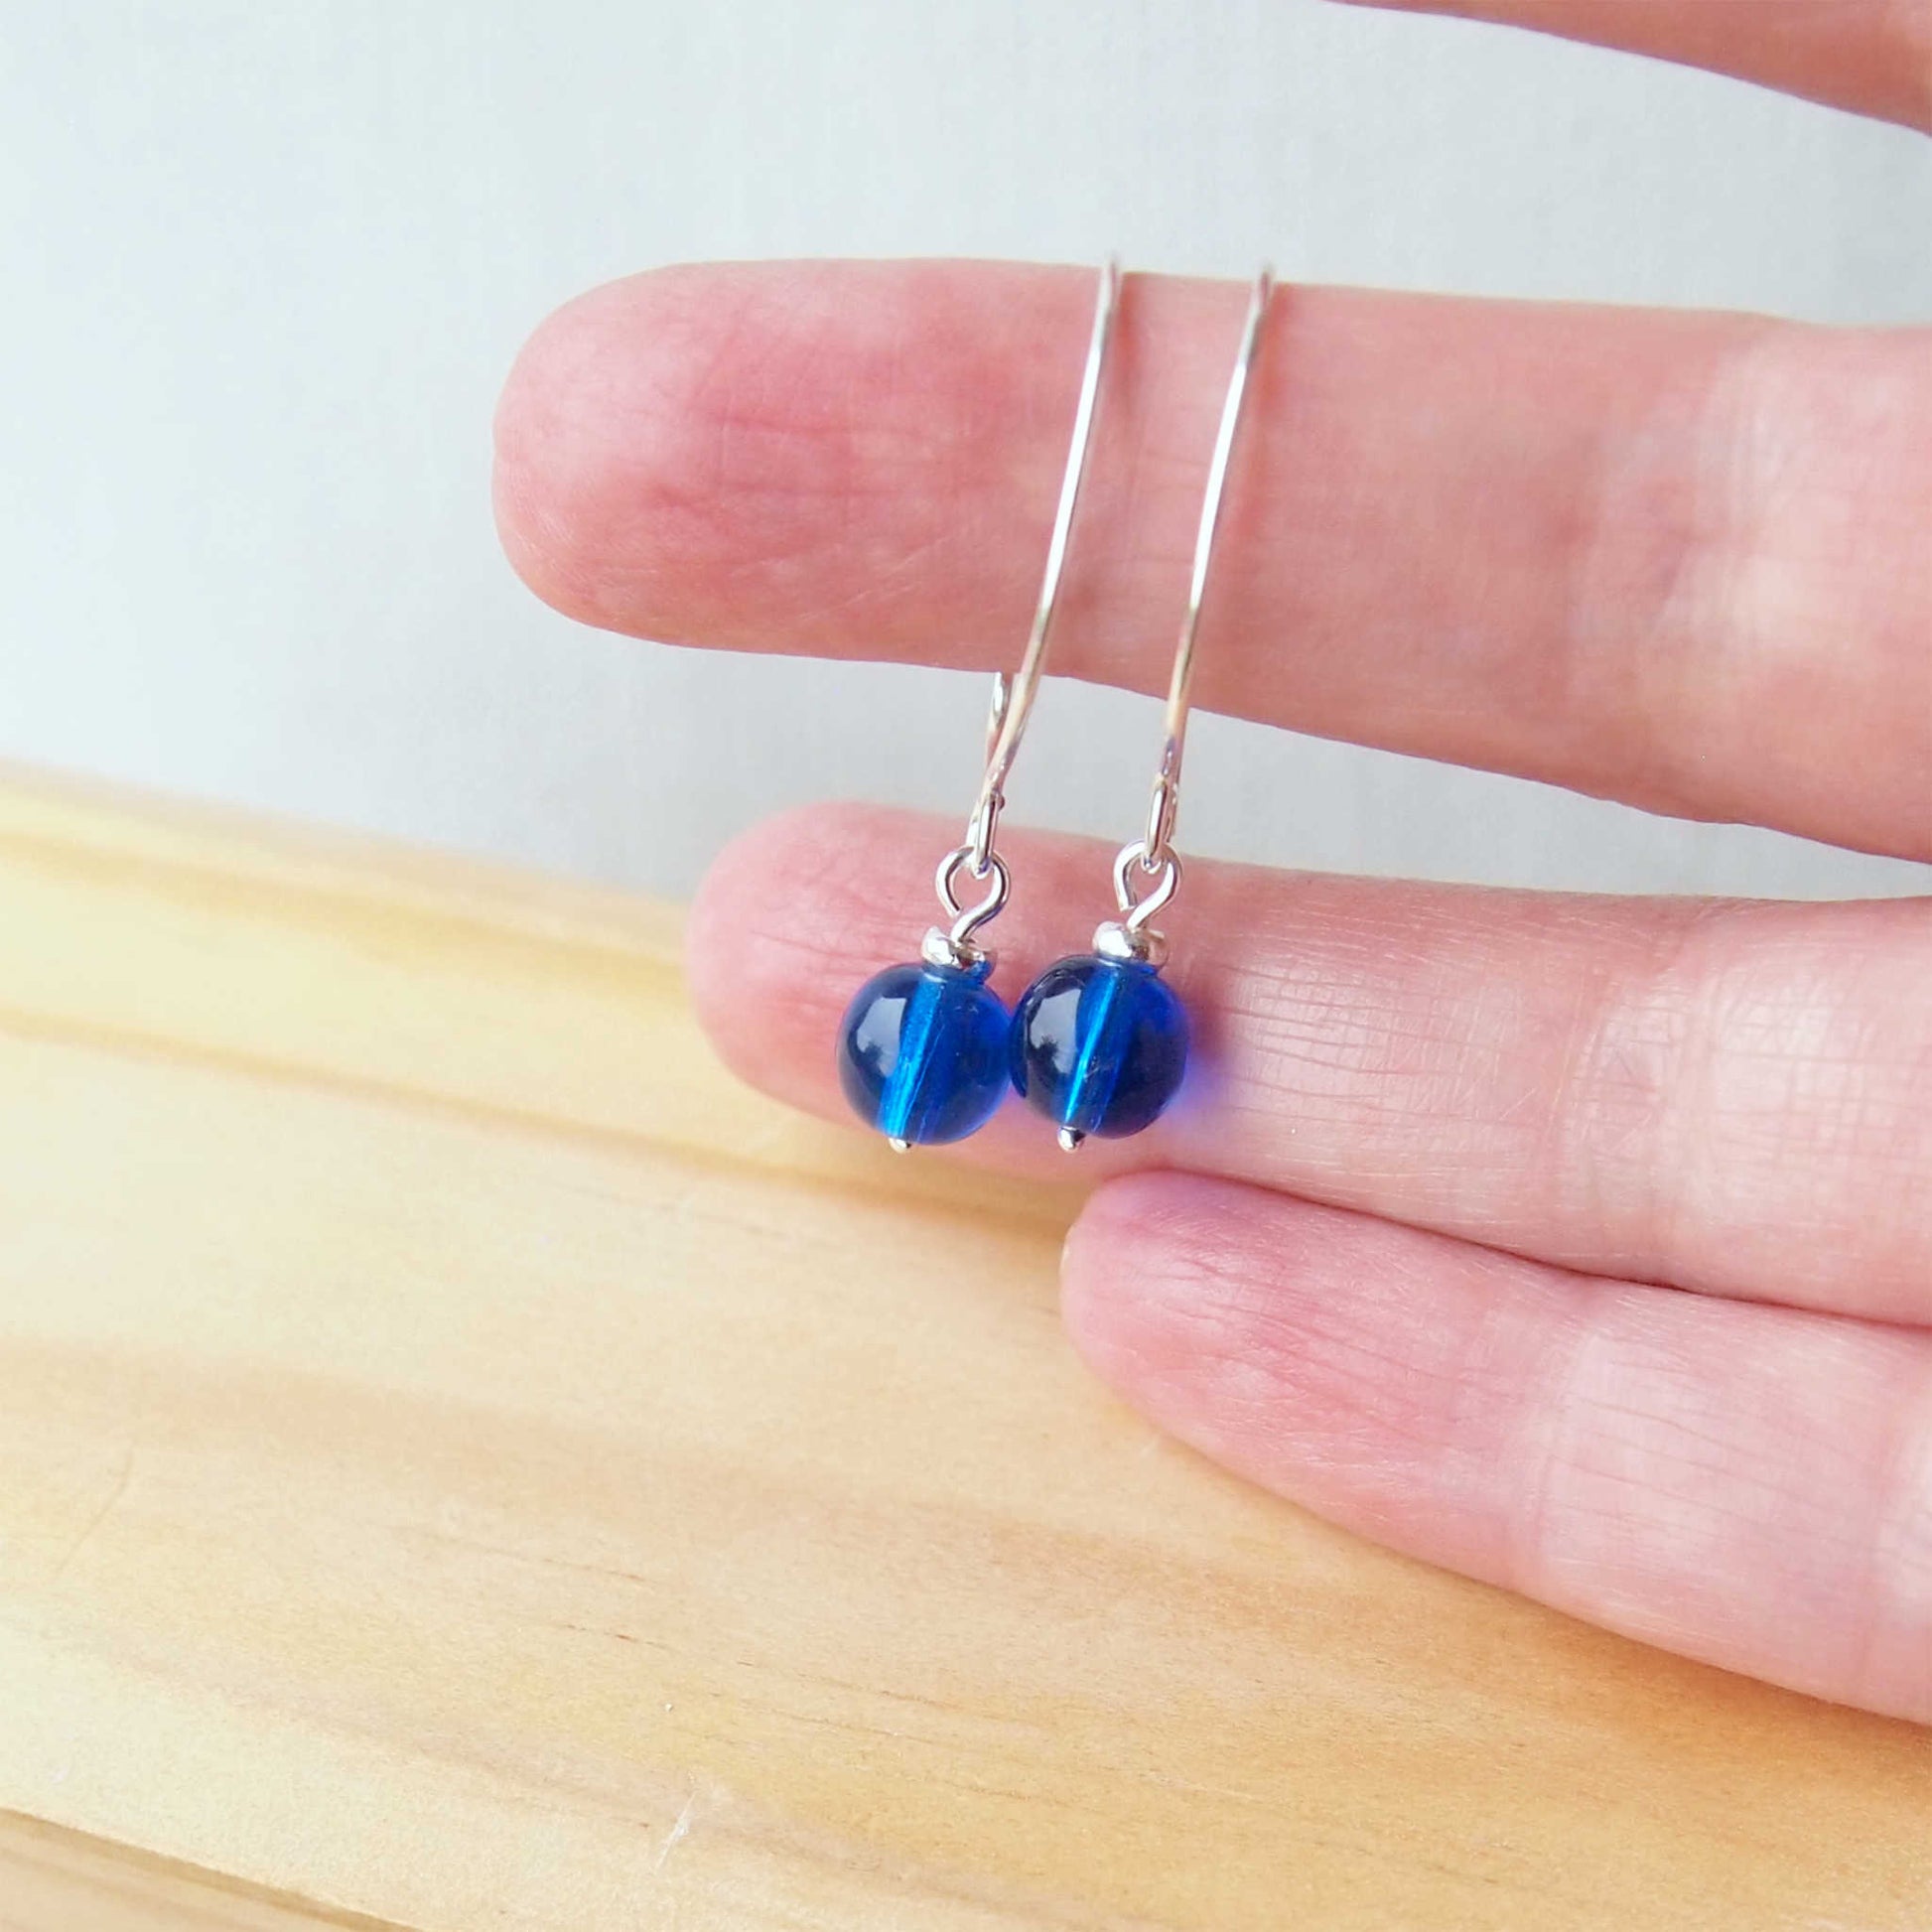 Cobalt blue Silver minimalist handmade silver hoops. Handcrafted ear wires with a round glass bead dropper. Made in Scotland by maram jewellery